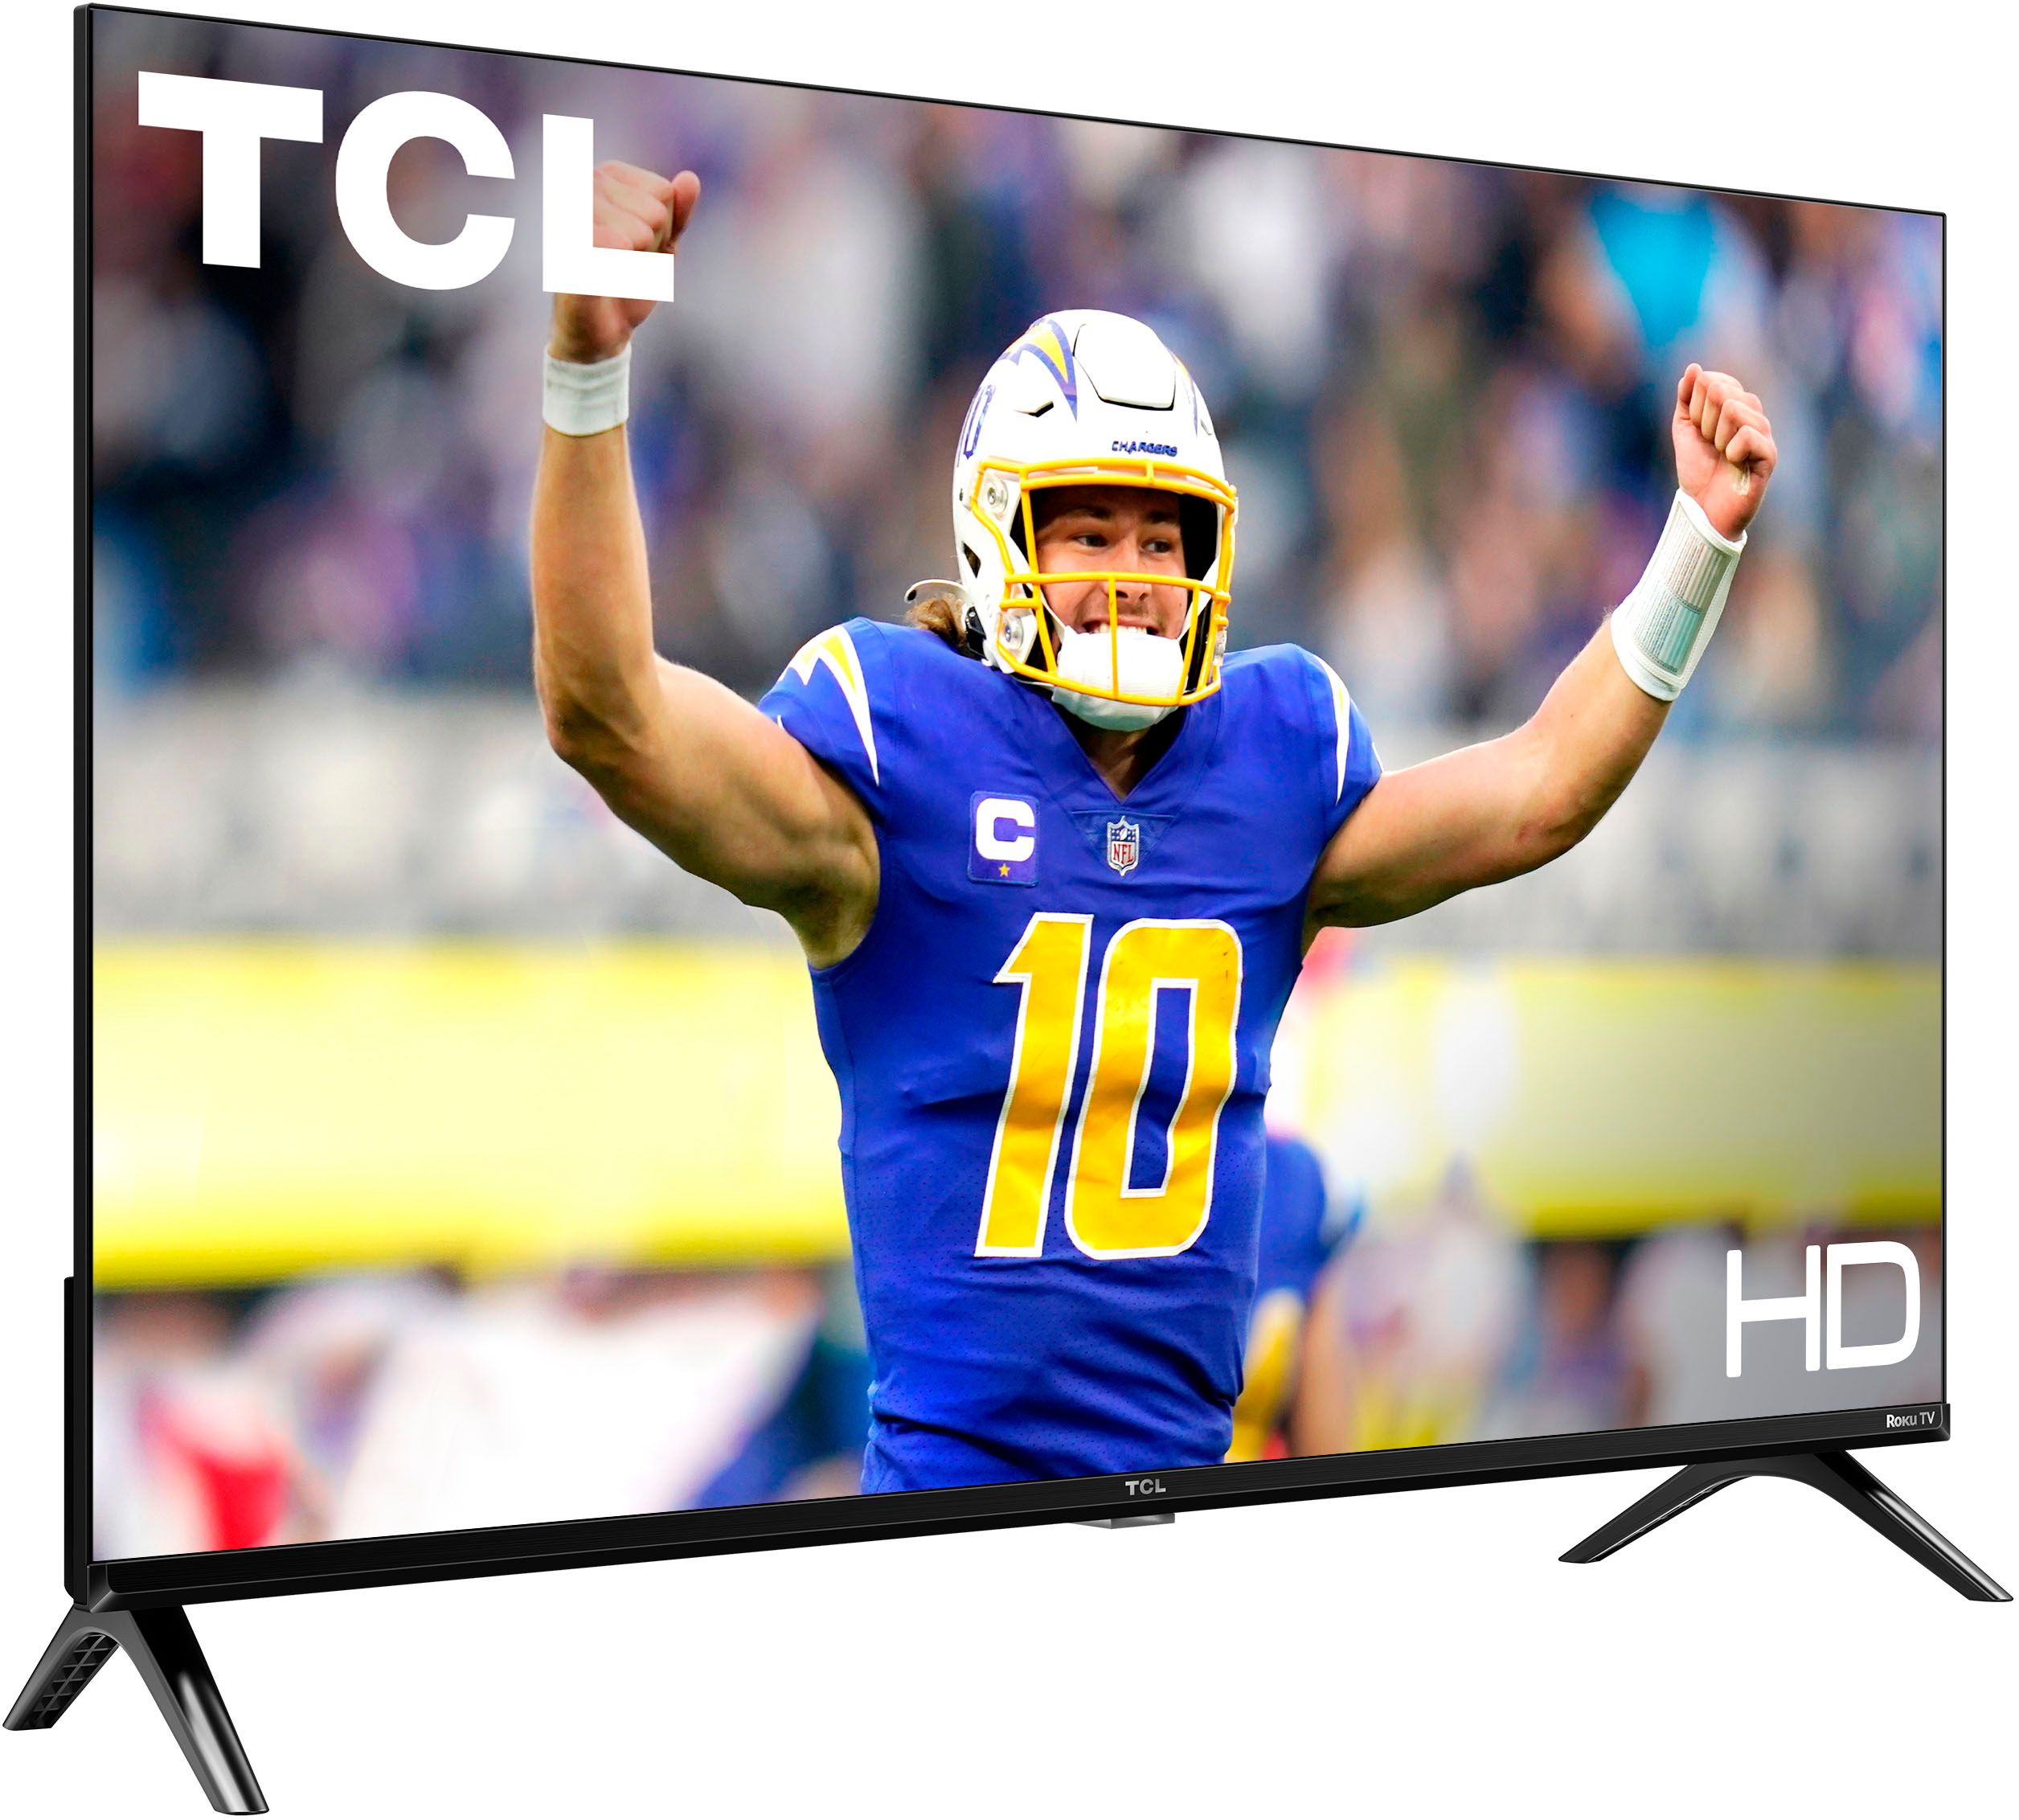 Angle View: TCL - 32" Class S2 S-Class 720p HD LED Smart TV with Roku TV